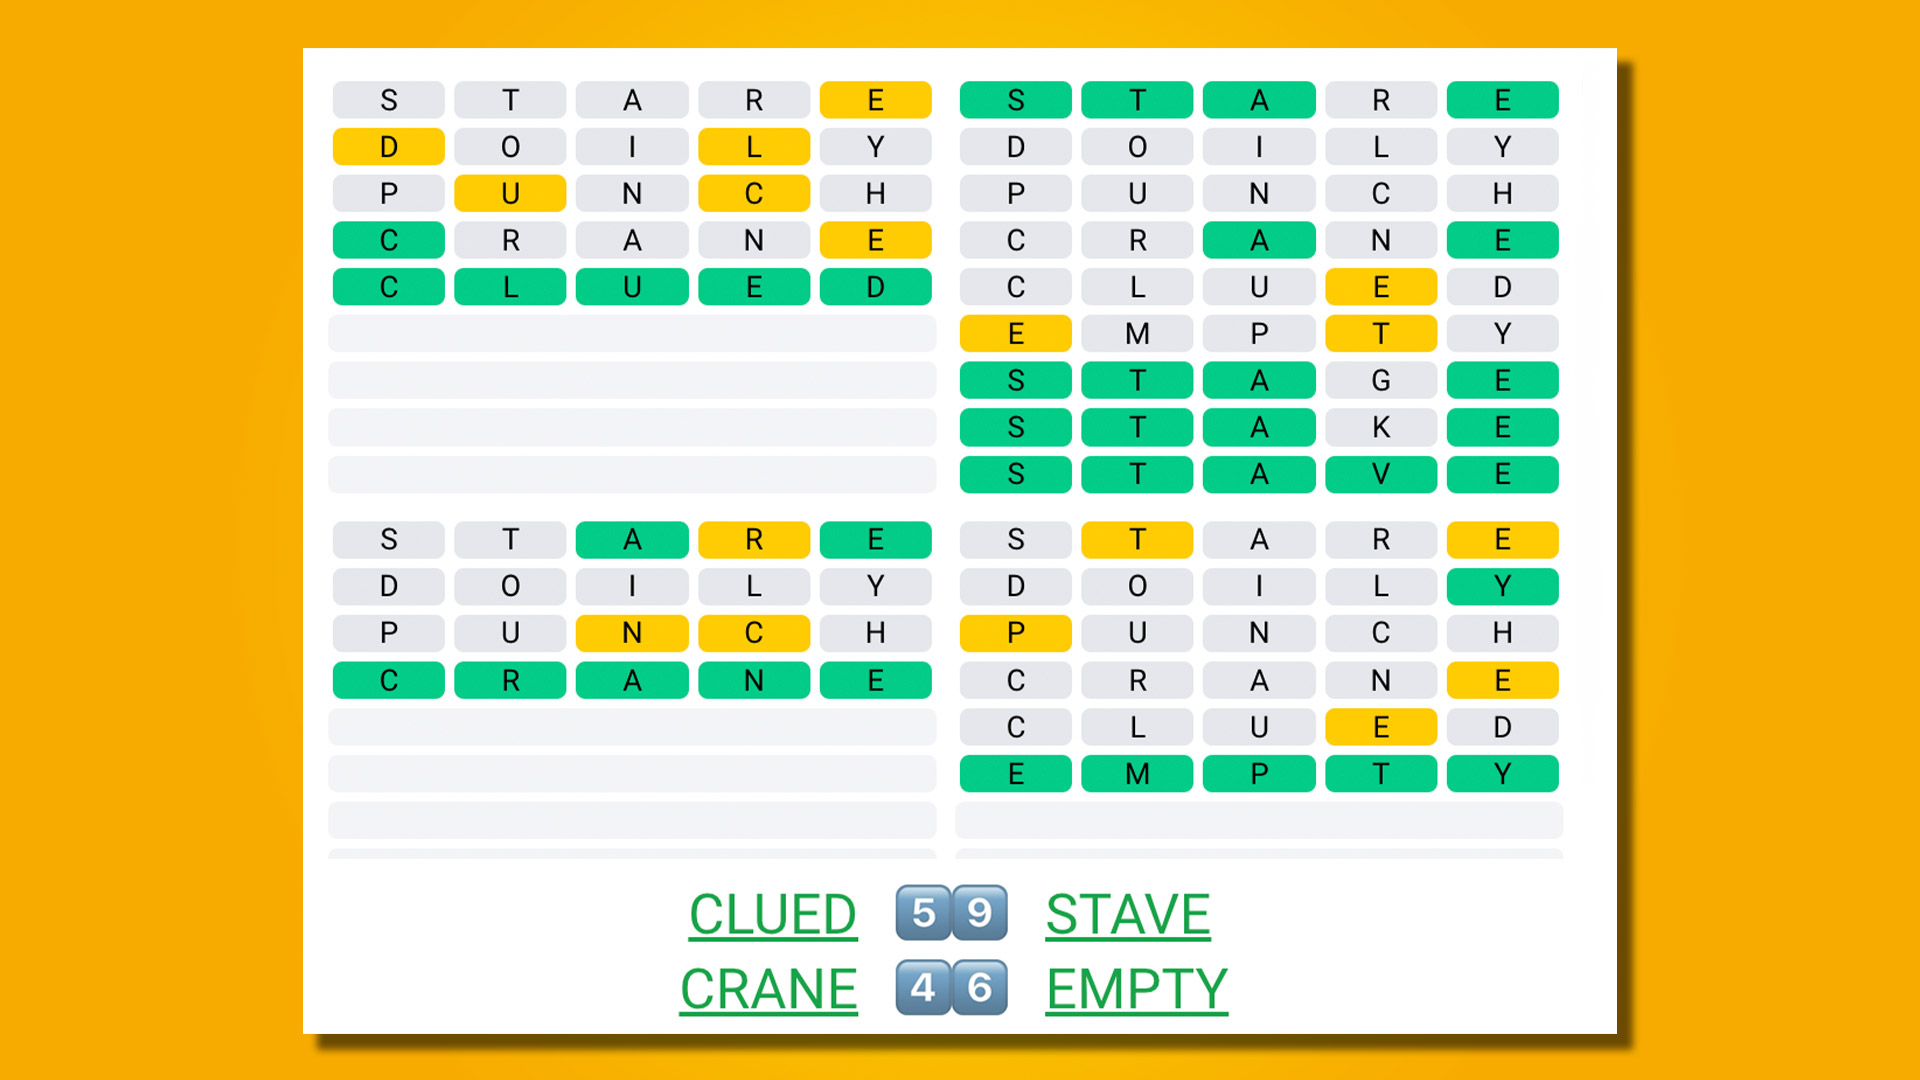 Qourdle 418 answers on a yellow background